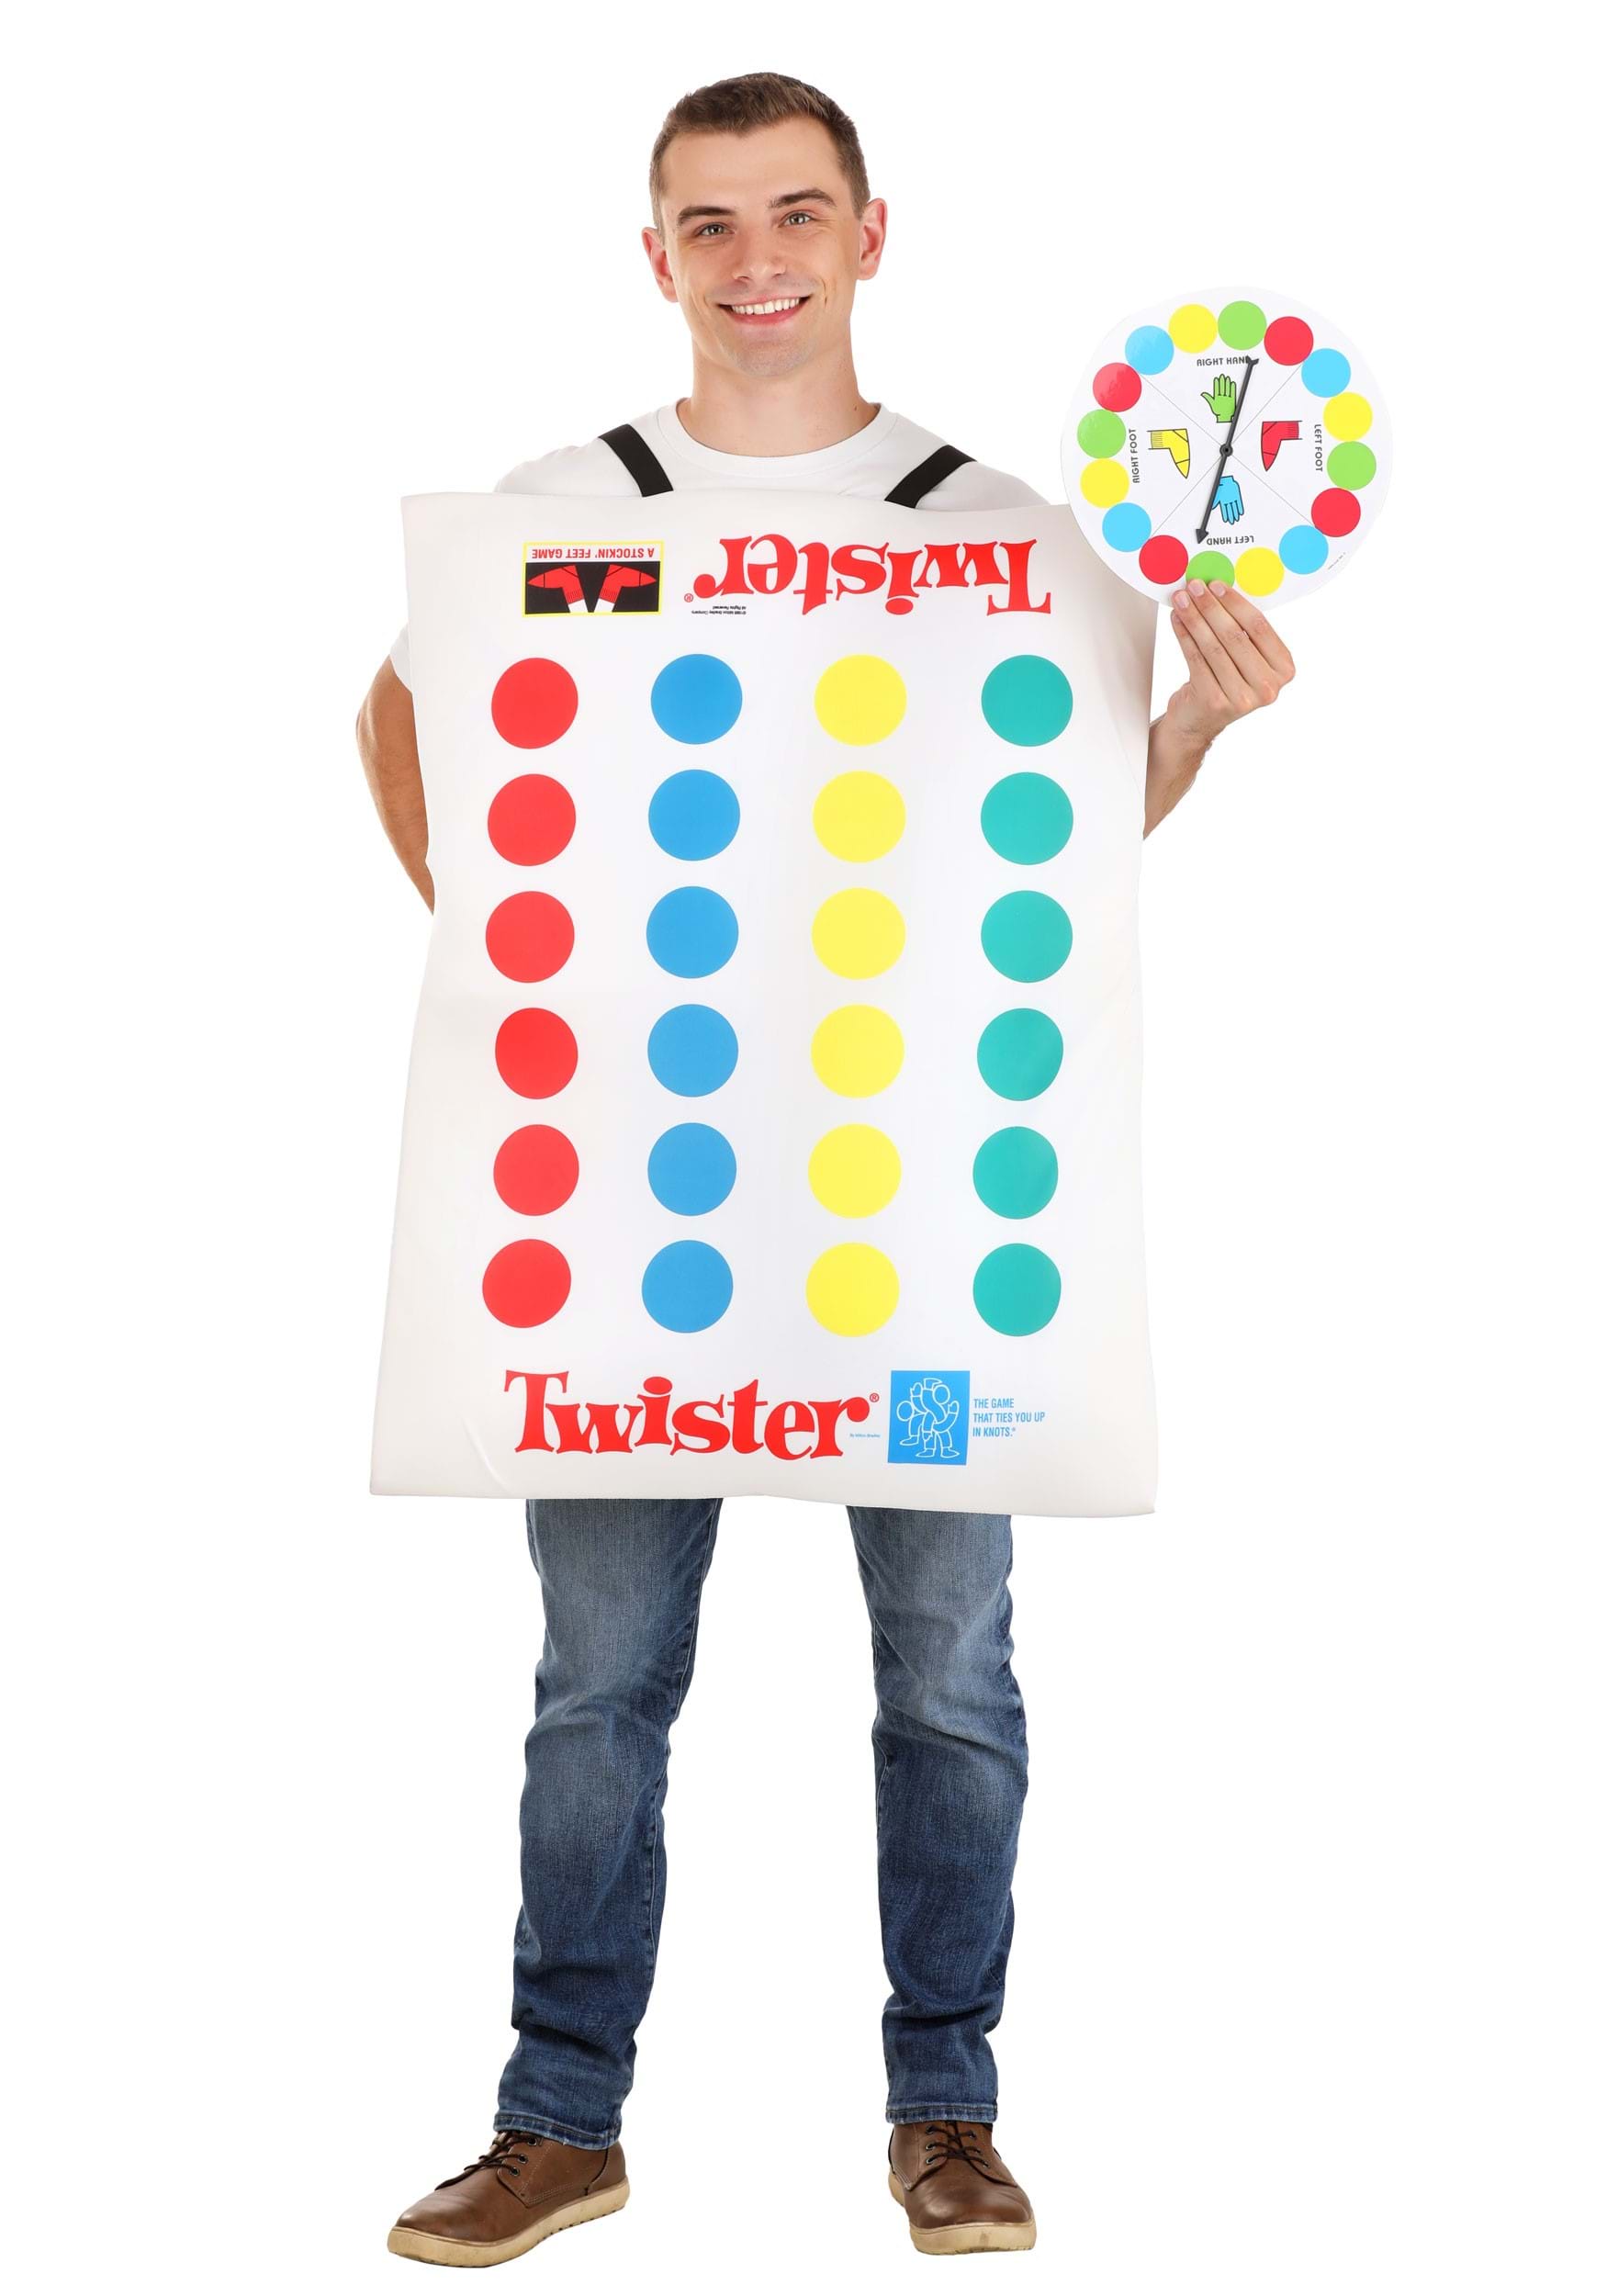 Photos - Fancy Dress Twister FUN Costumes  Mat Sandwich Board Costume for Adults Blue/Red 